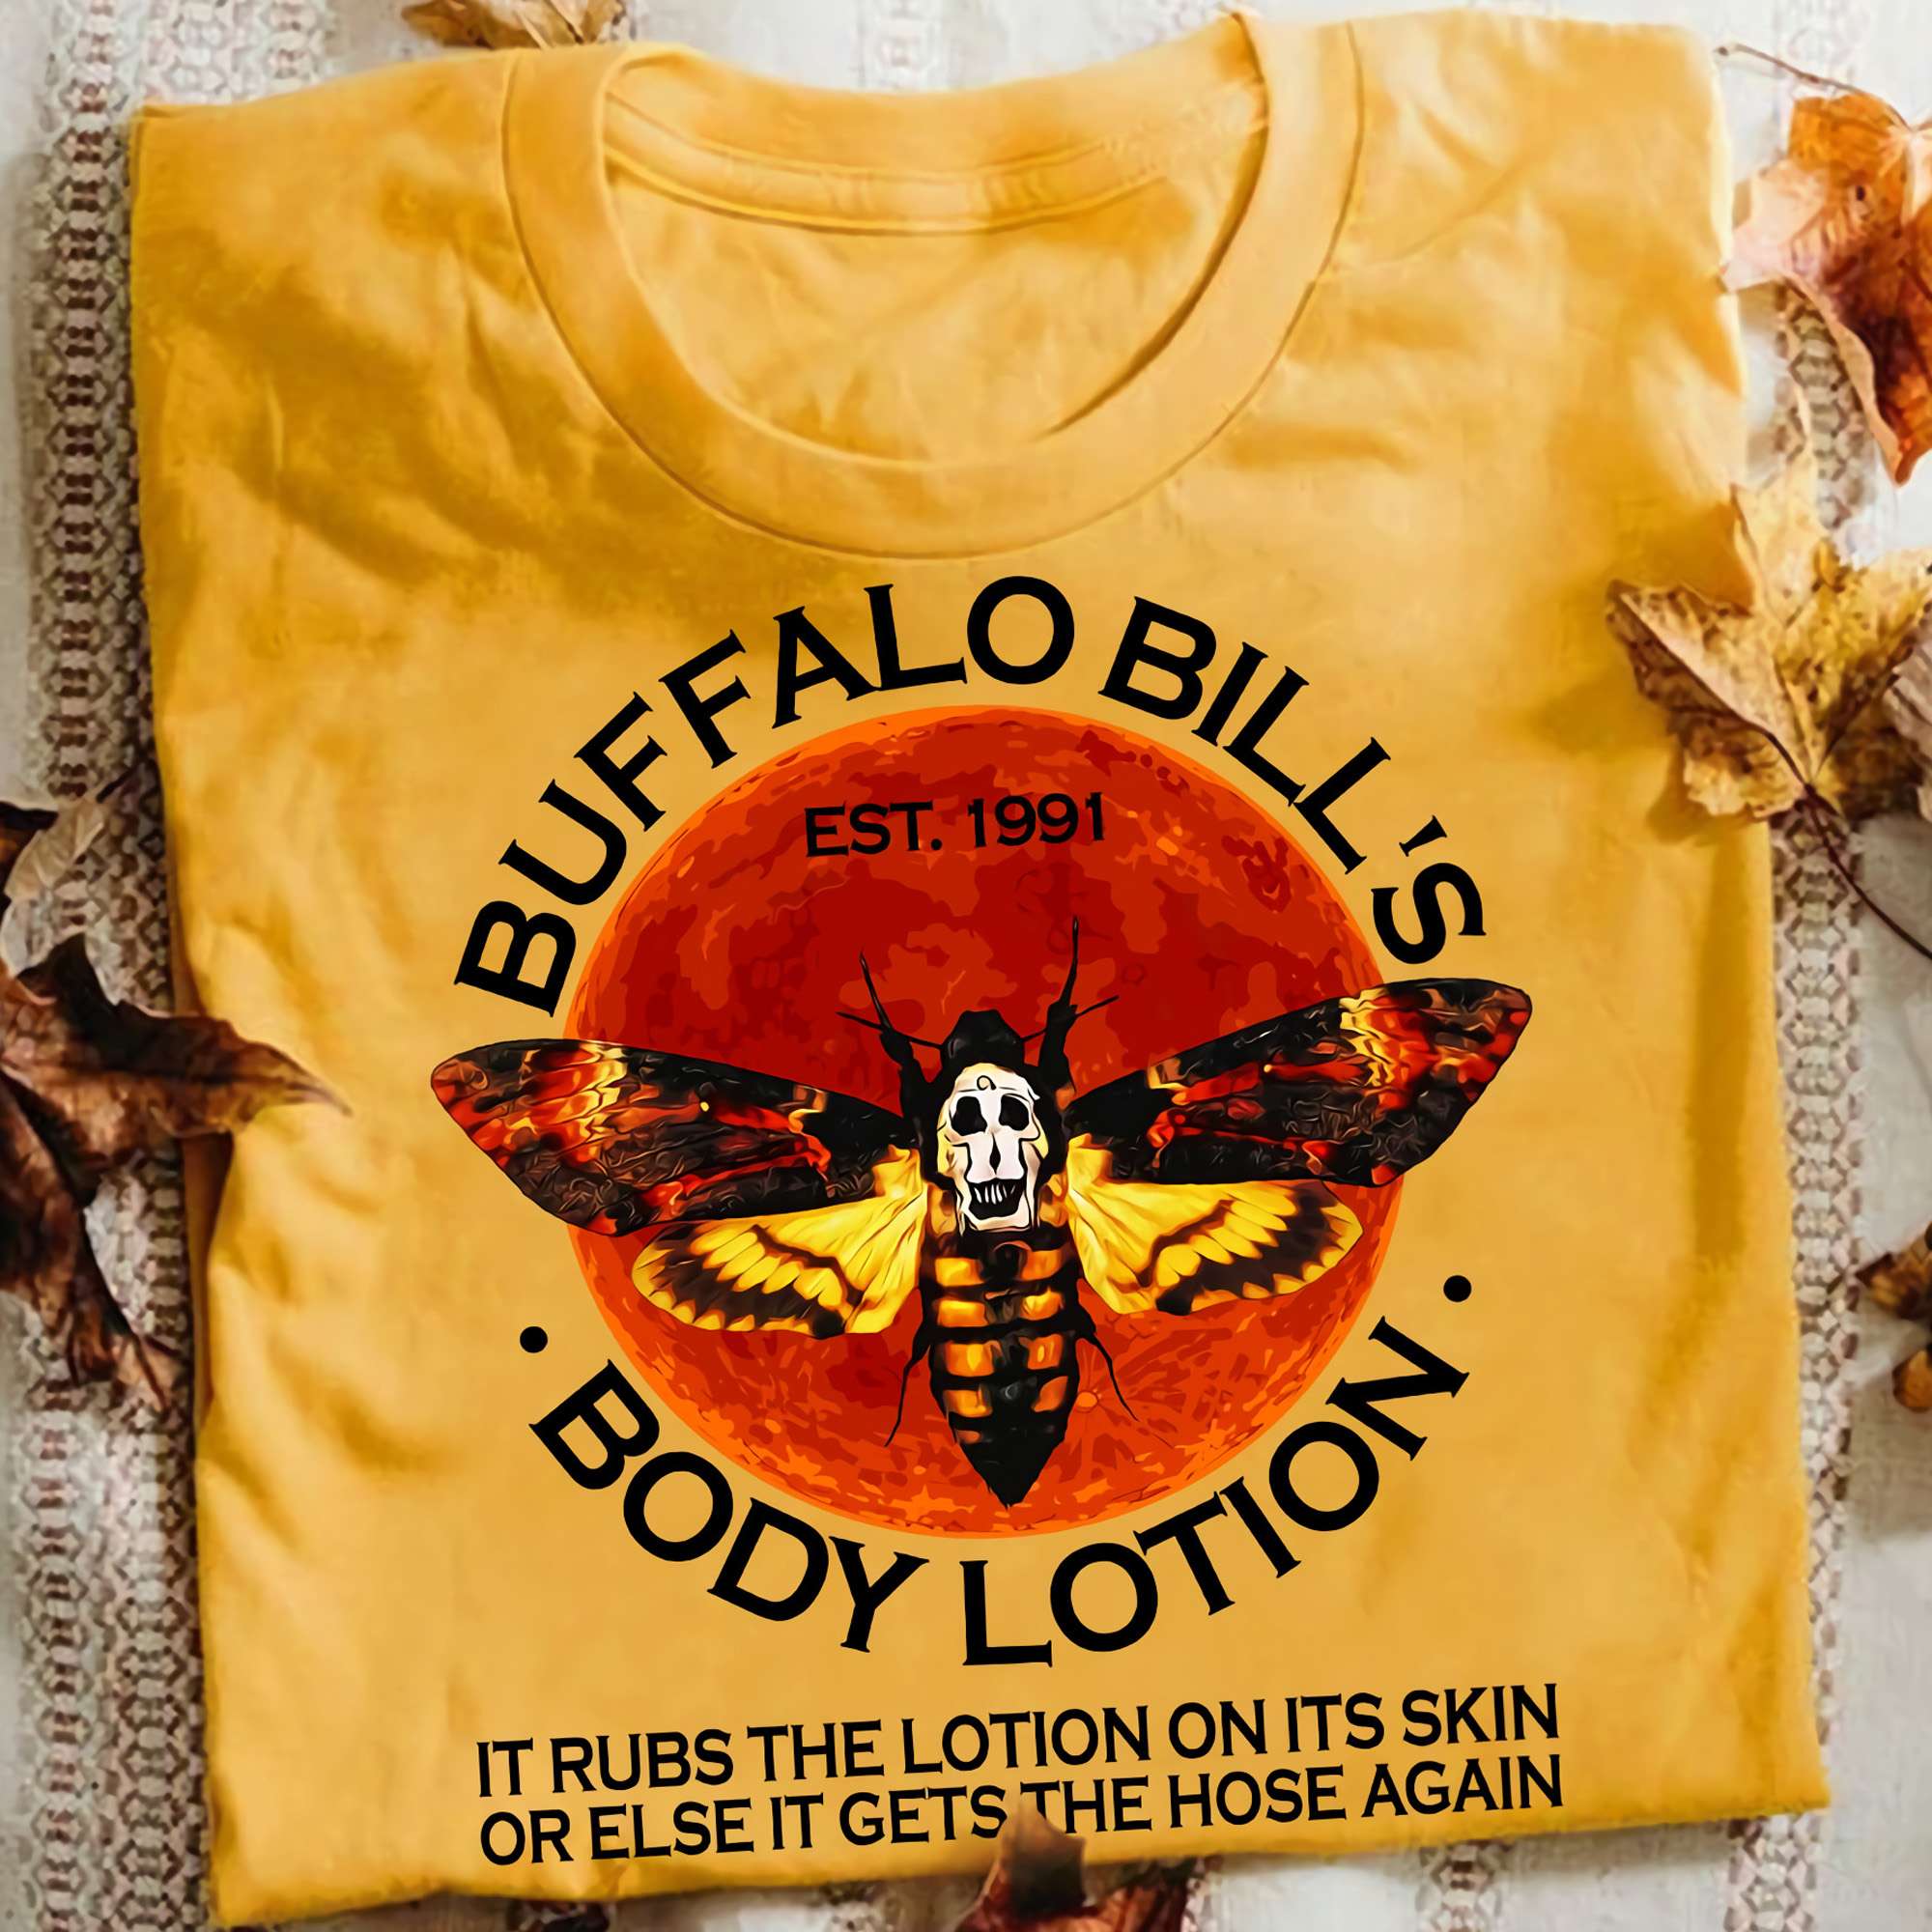 Buffalo Bill's Body Lotion - It rubs the lotion on its skin or else it gets the hose agian